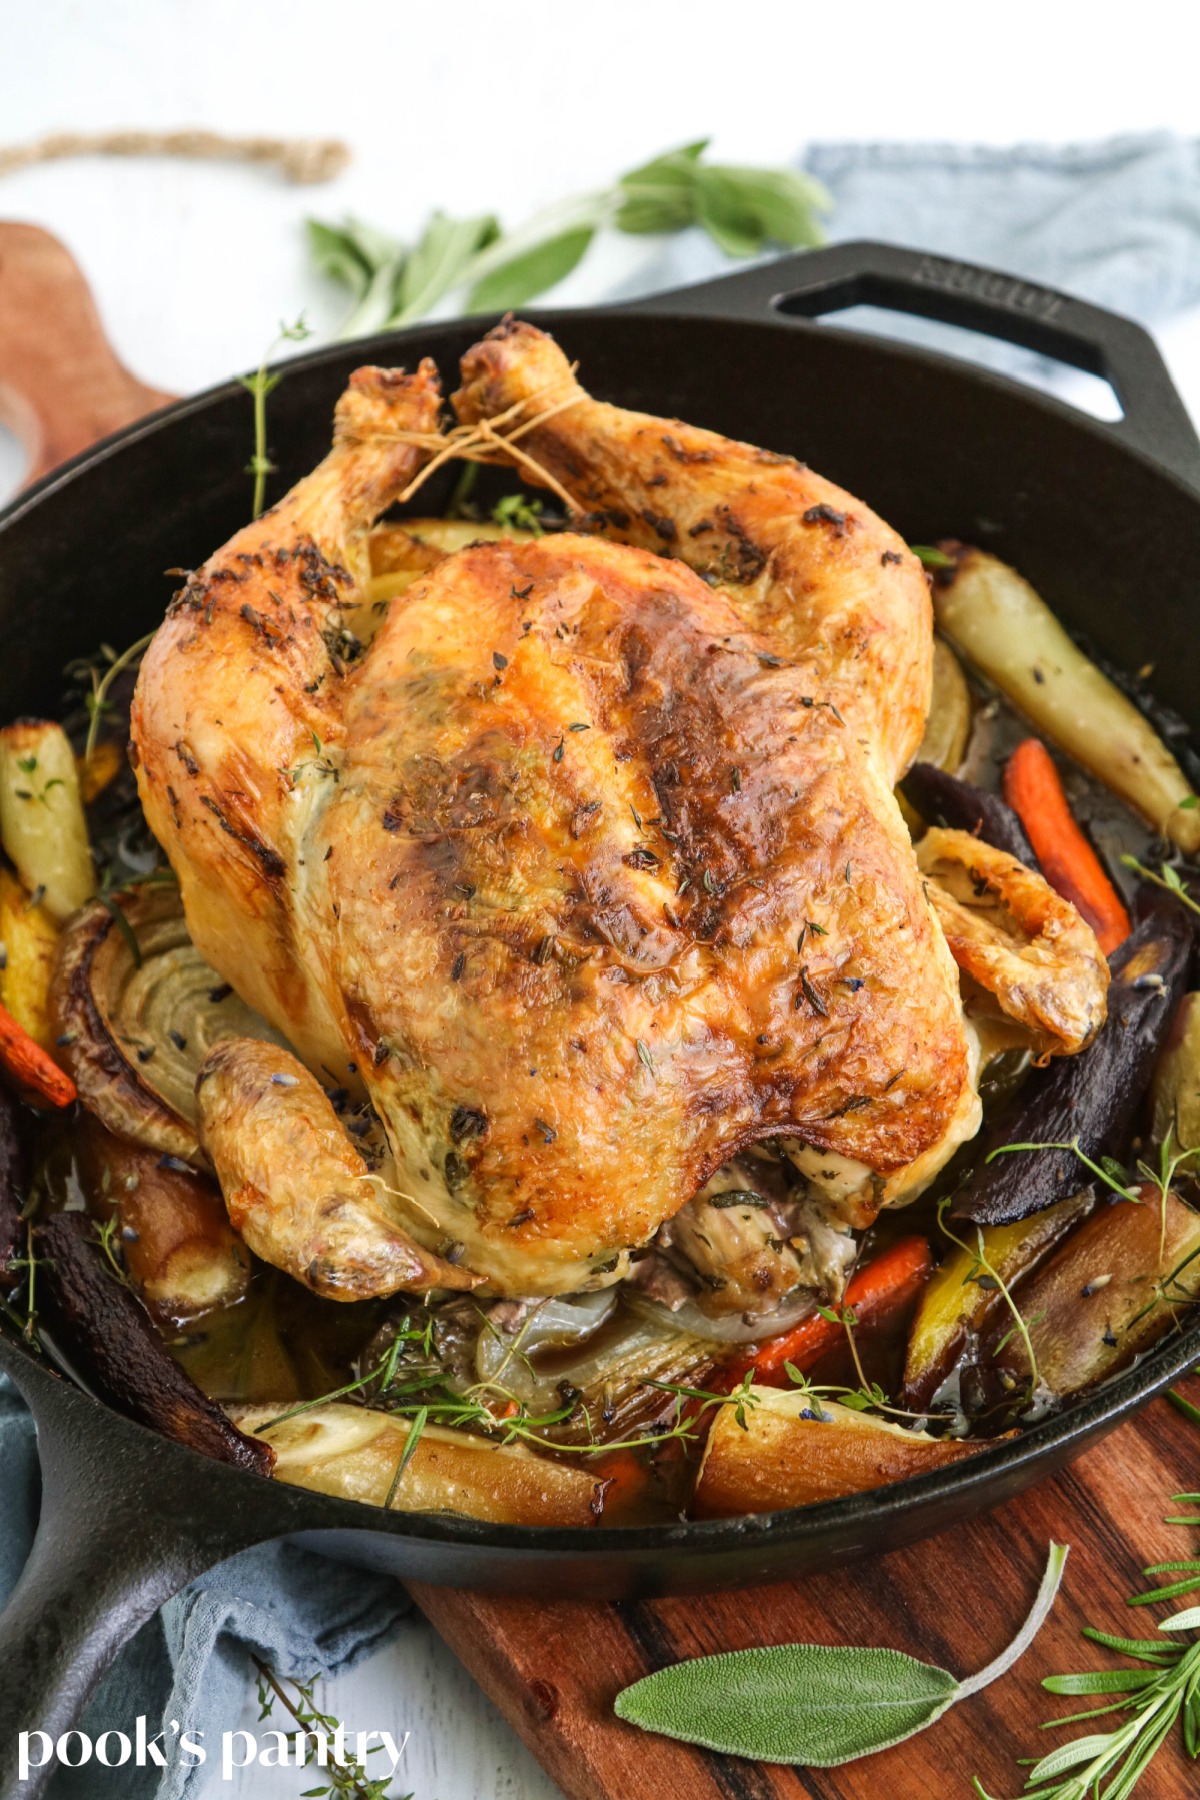 Perfect roast chicken and vegetables with French herbs.